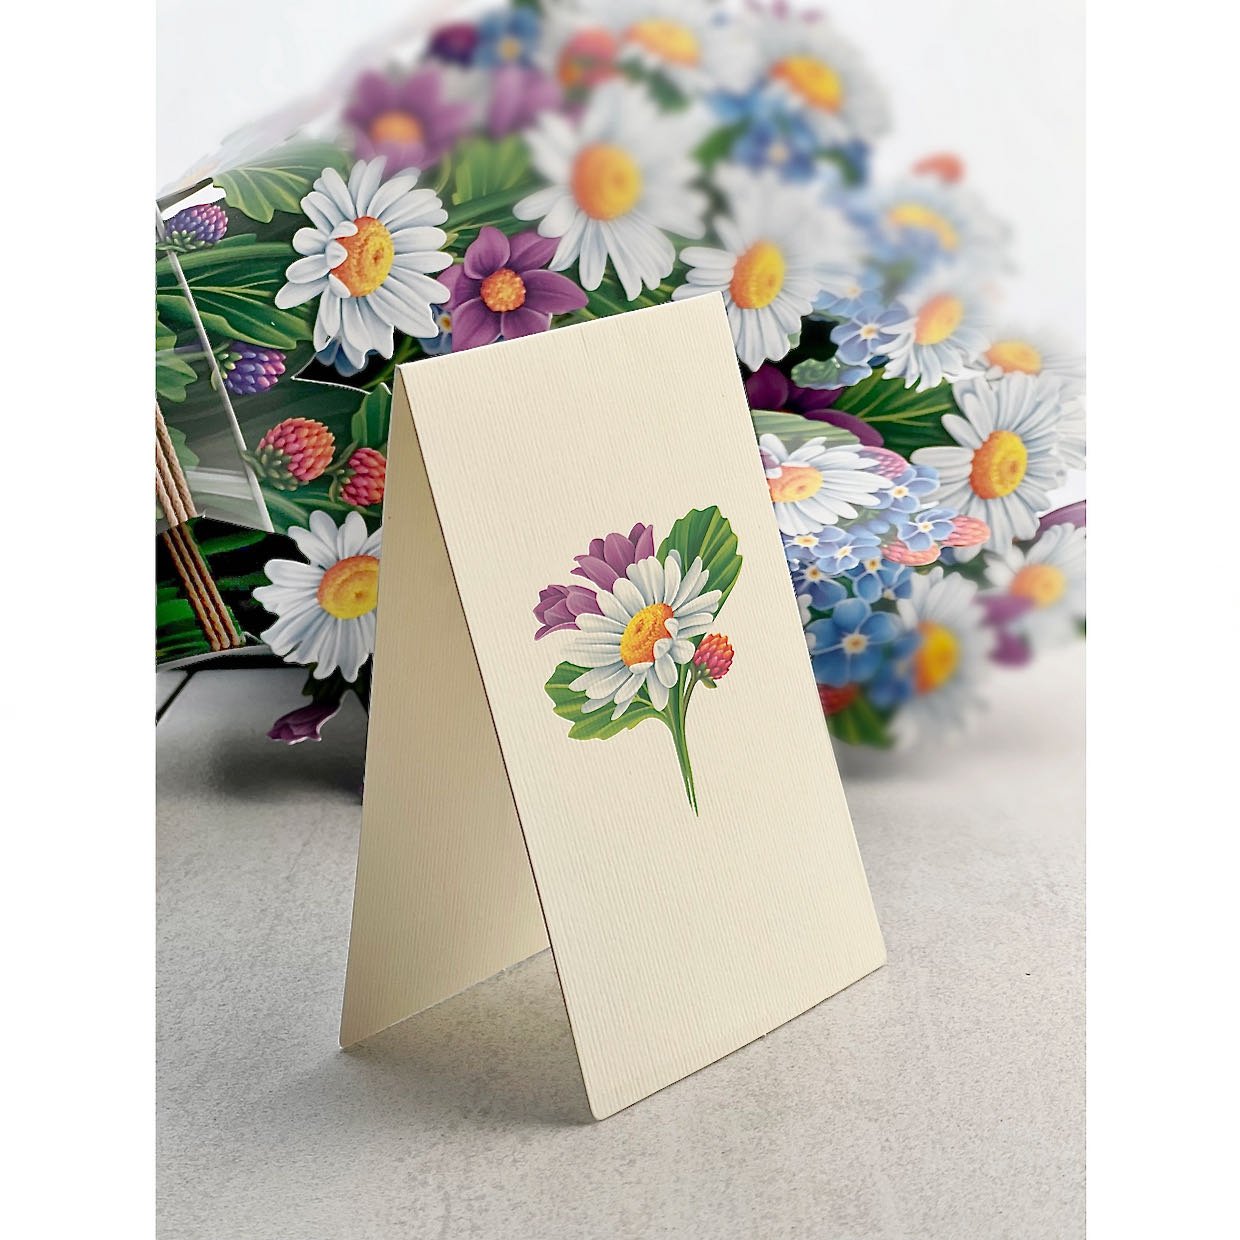 3D Life-Sized Paper Daisies & Wildflowers Bouquet Pop Up Greeting Card - Marmalade Mercantile